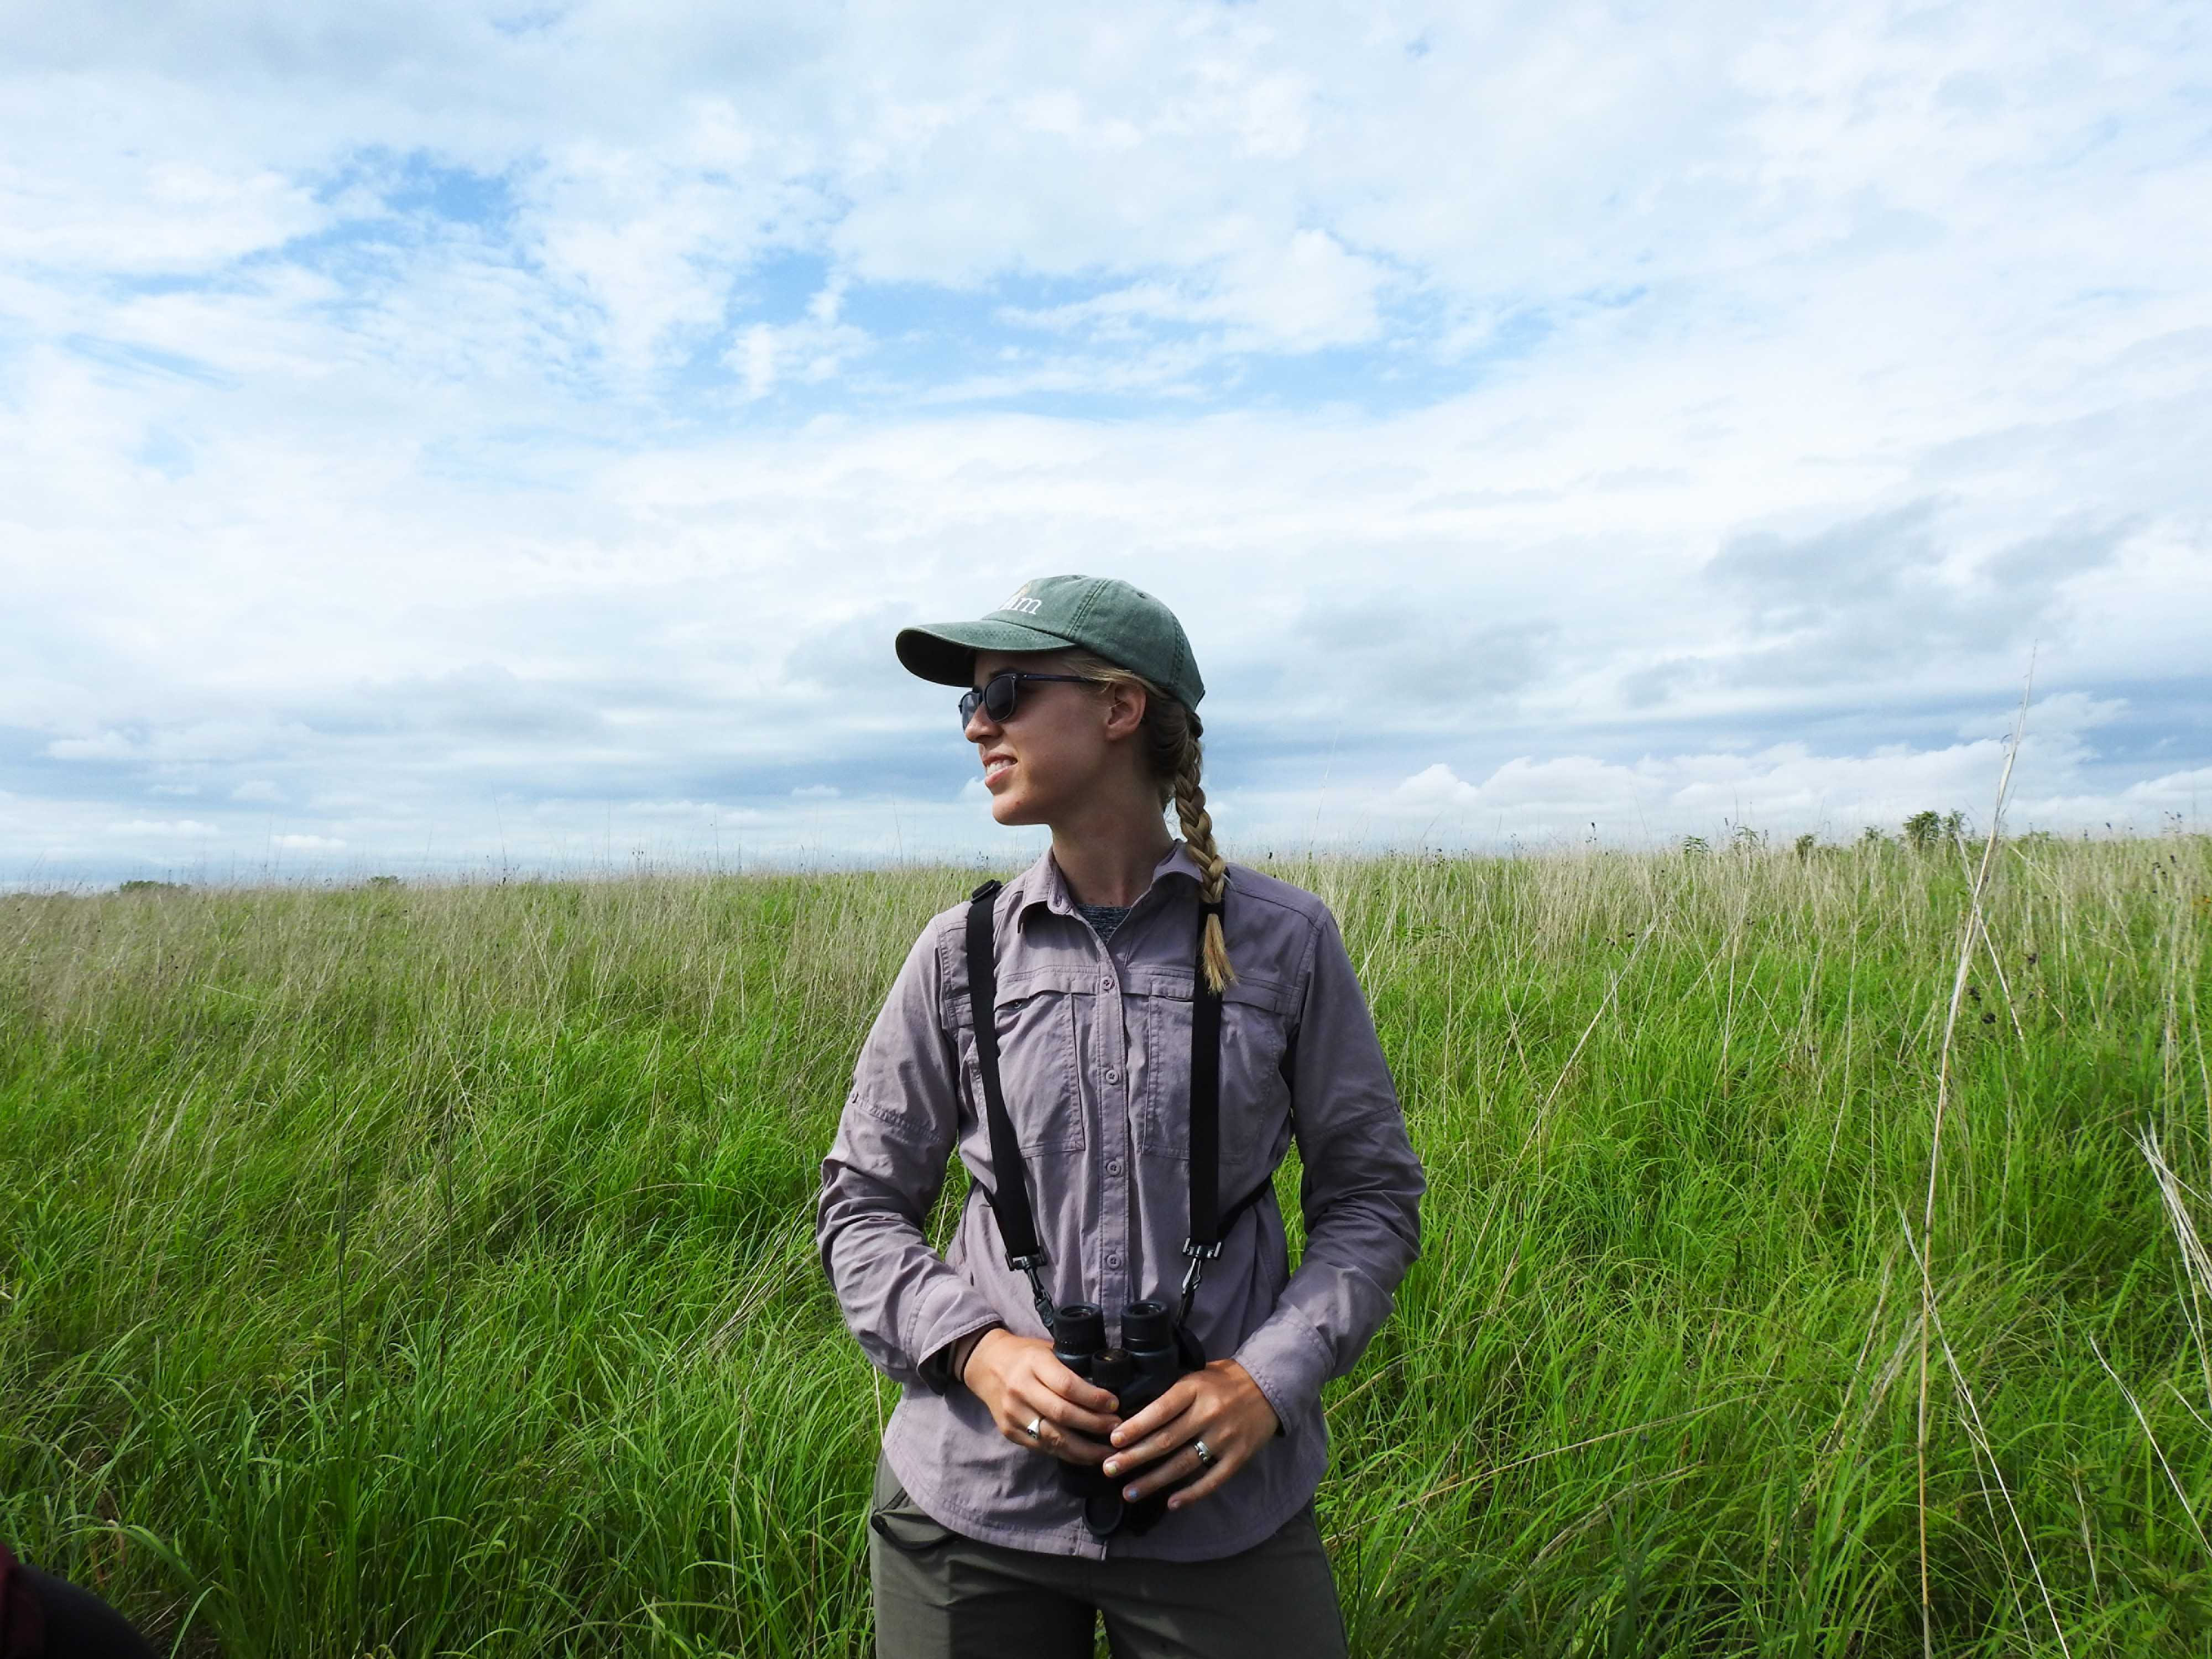 Jaime Coon, assistant professor of biology at Earlham College, stands in a field holding binoculars.